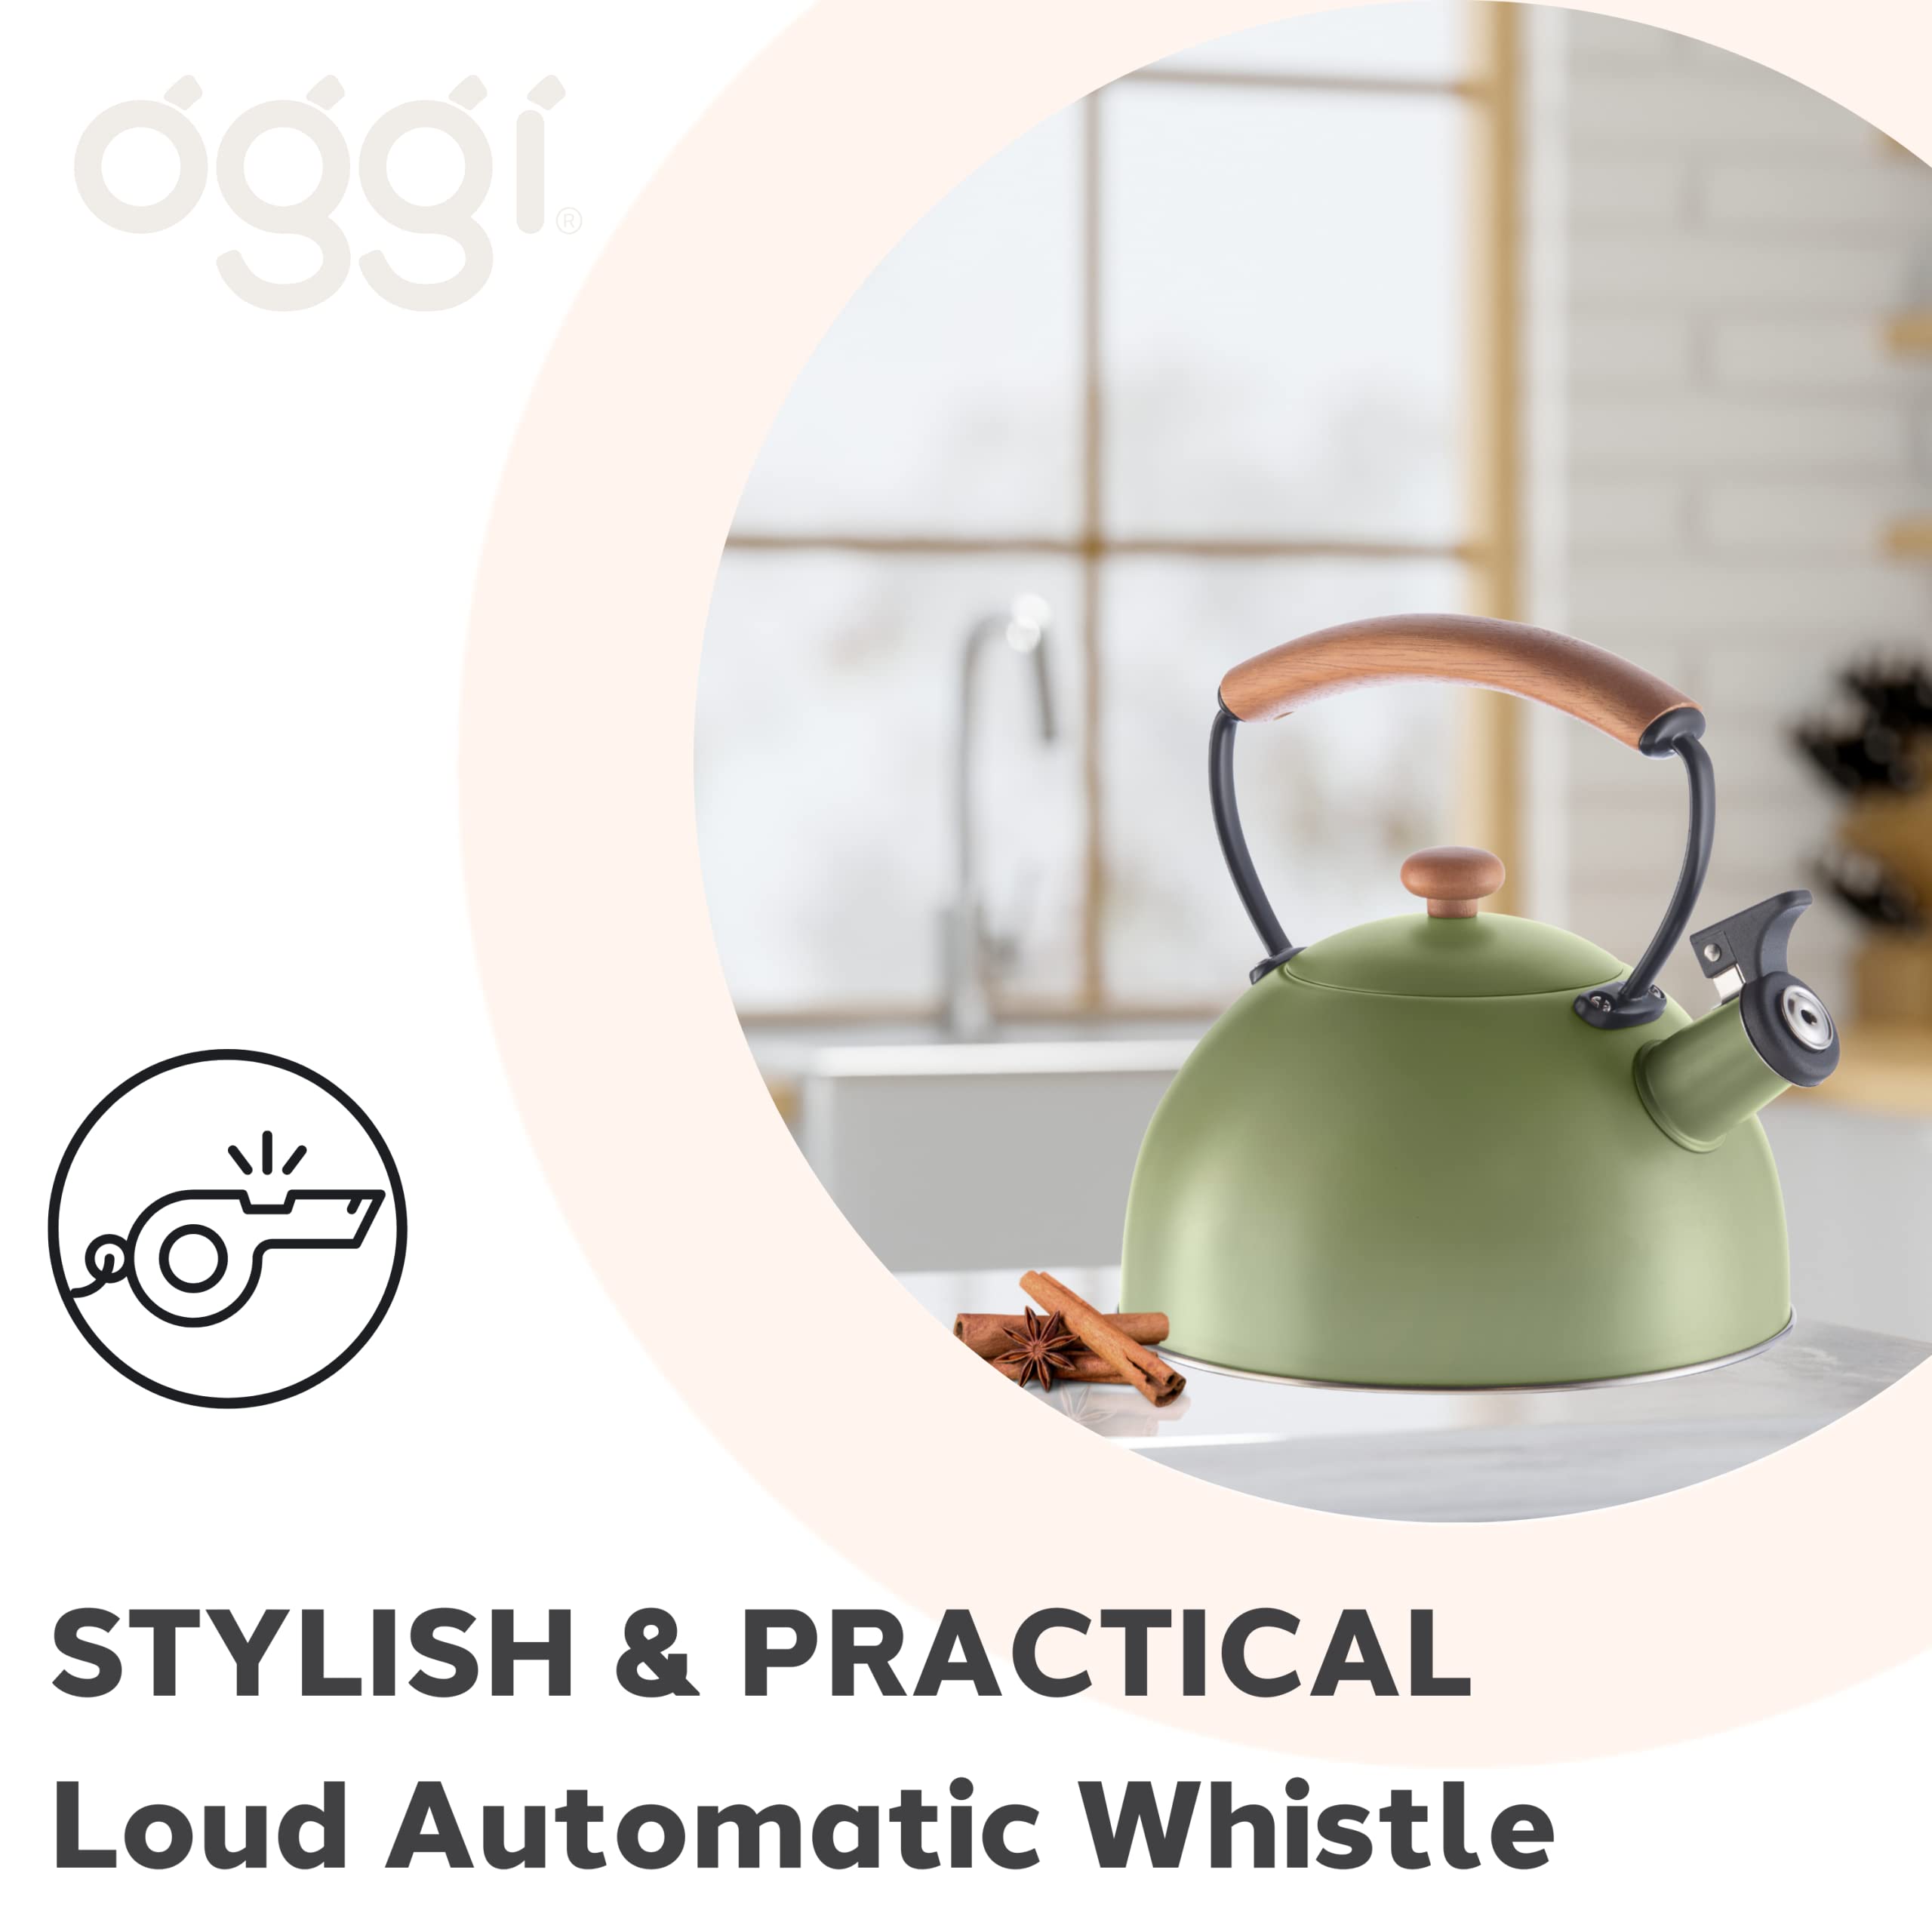 OGGI Tea Kettle for Stove Top - 85oz / 2.5lt, Stainless Steel Kettle with Loud Whistle & Stay-Cool Wood Handle, Ideal Hot Water Kettle and Water Boiler - Green